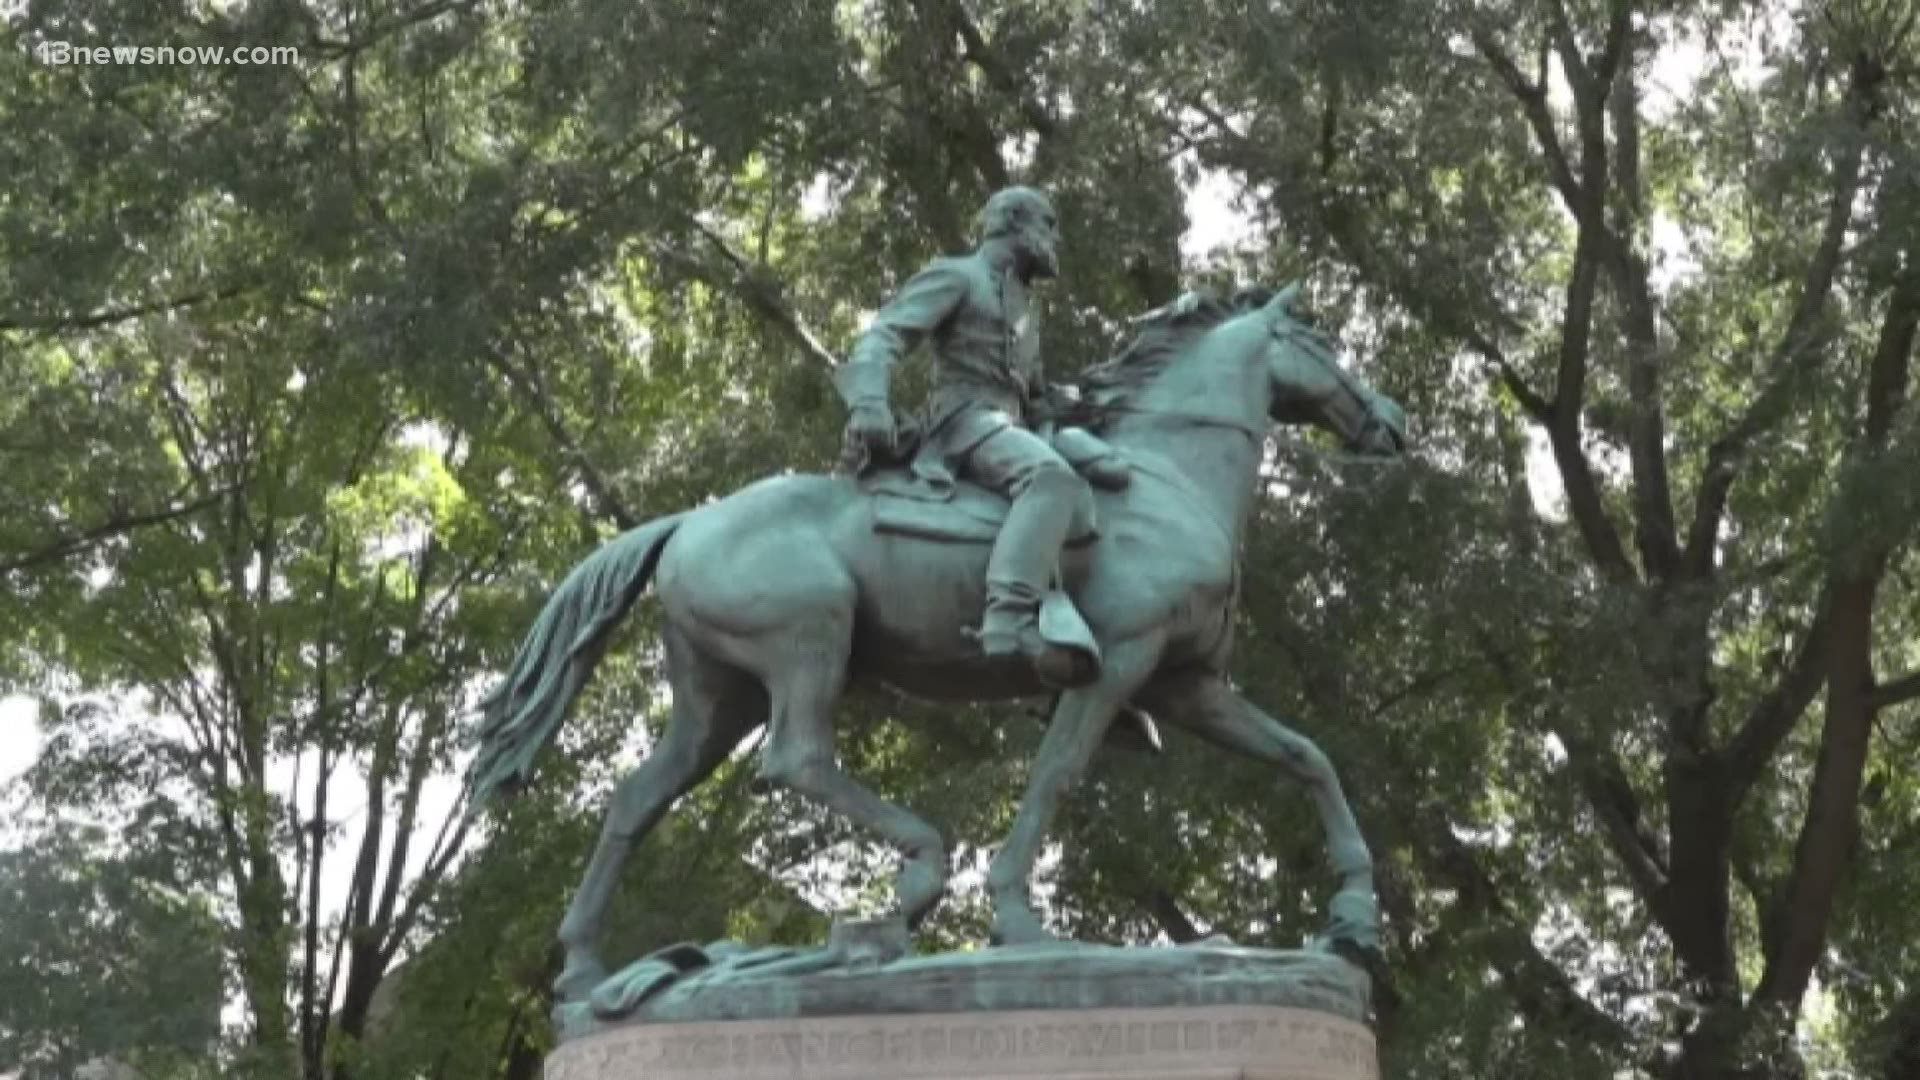 Charlottesville says a Confederate monument that helped spark a violent white supremacist rally is set to come down Saturday.